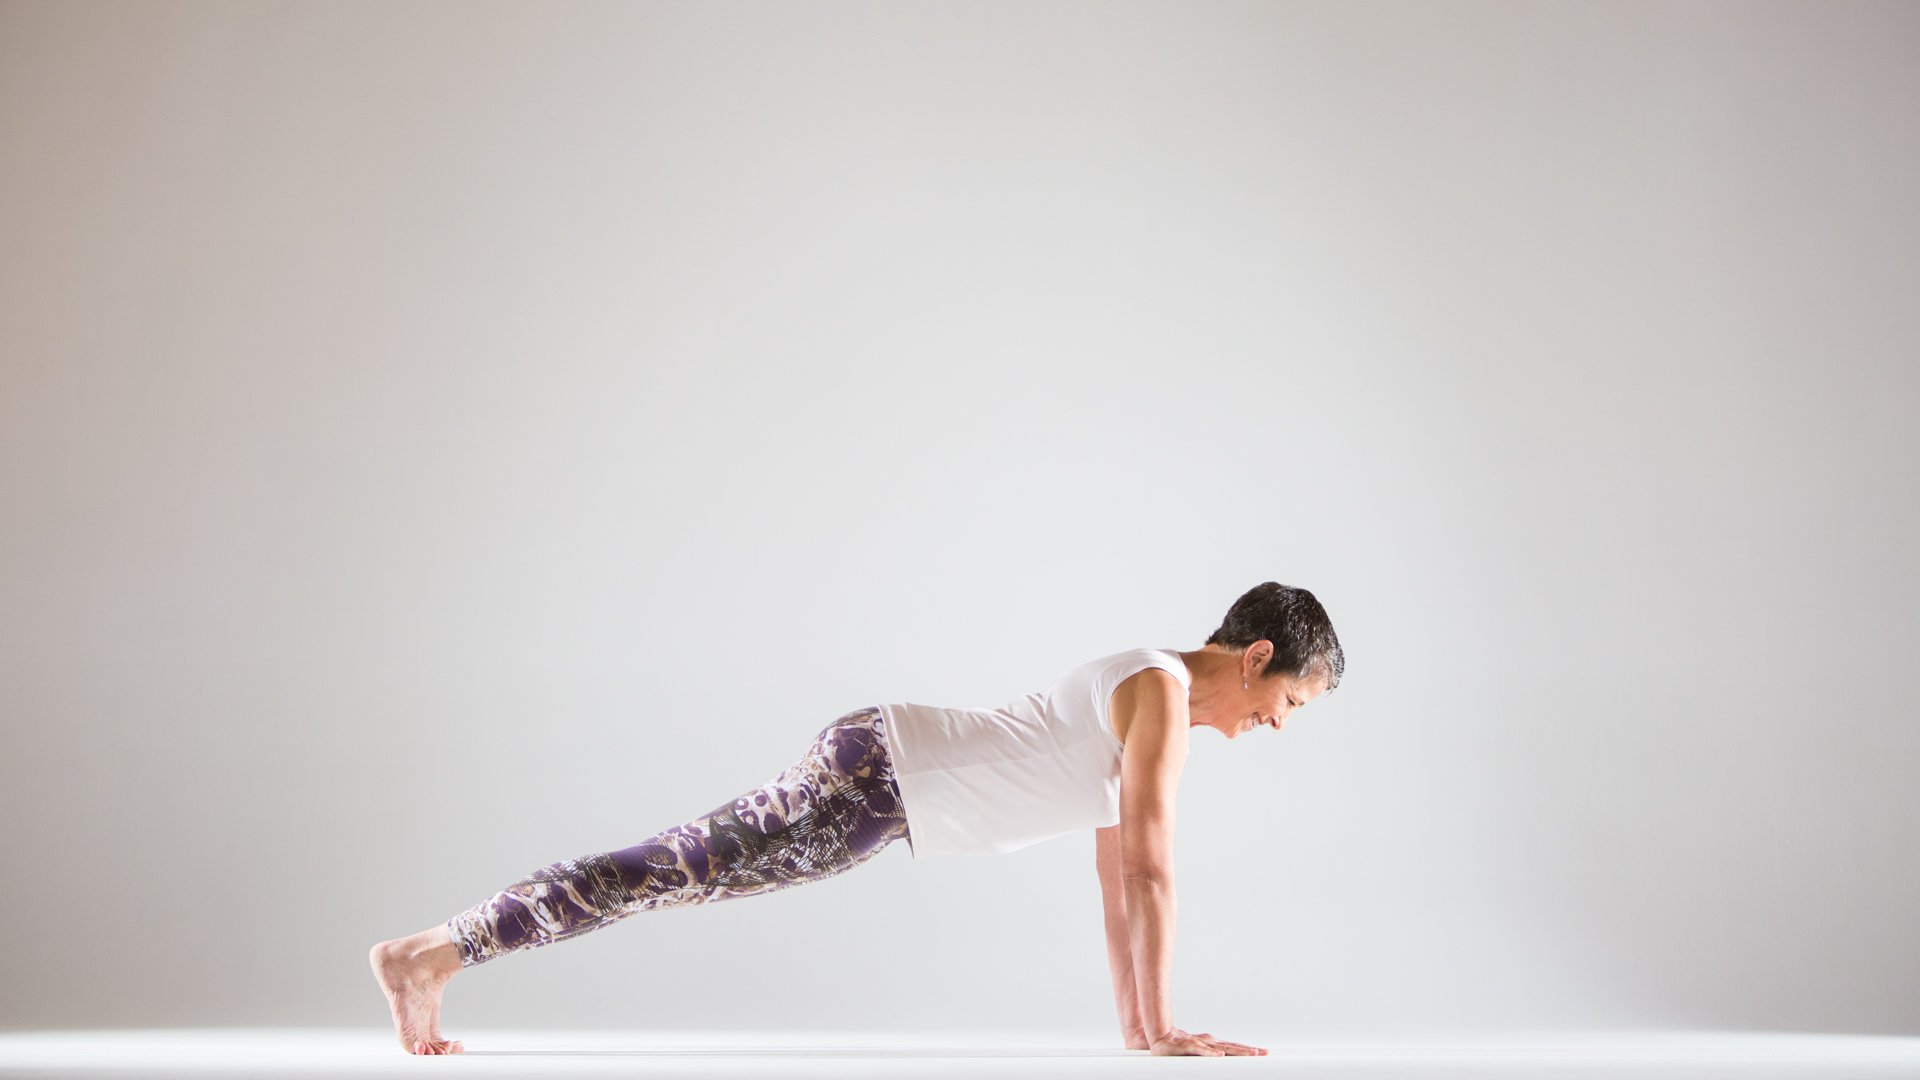 Does Yoga Strengthen Bones? Here are 3 poses that do!